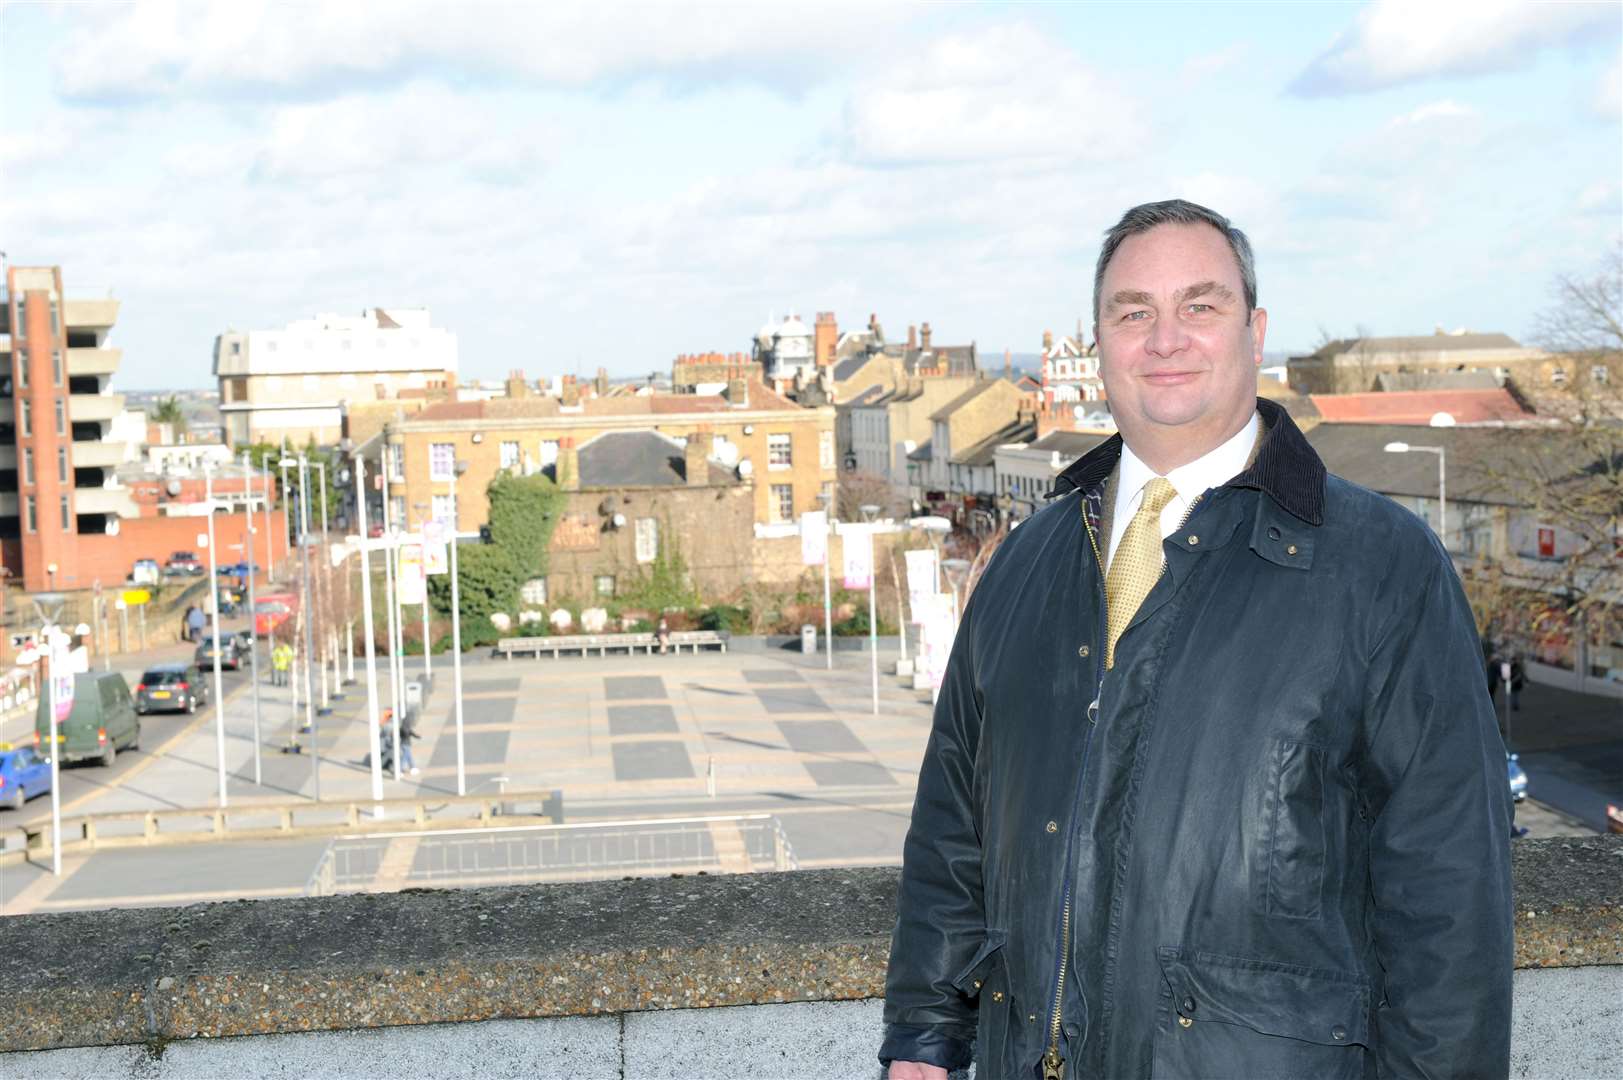 Cllr John Burden wants hospital staff to be able to speak out